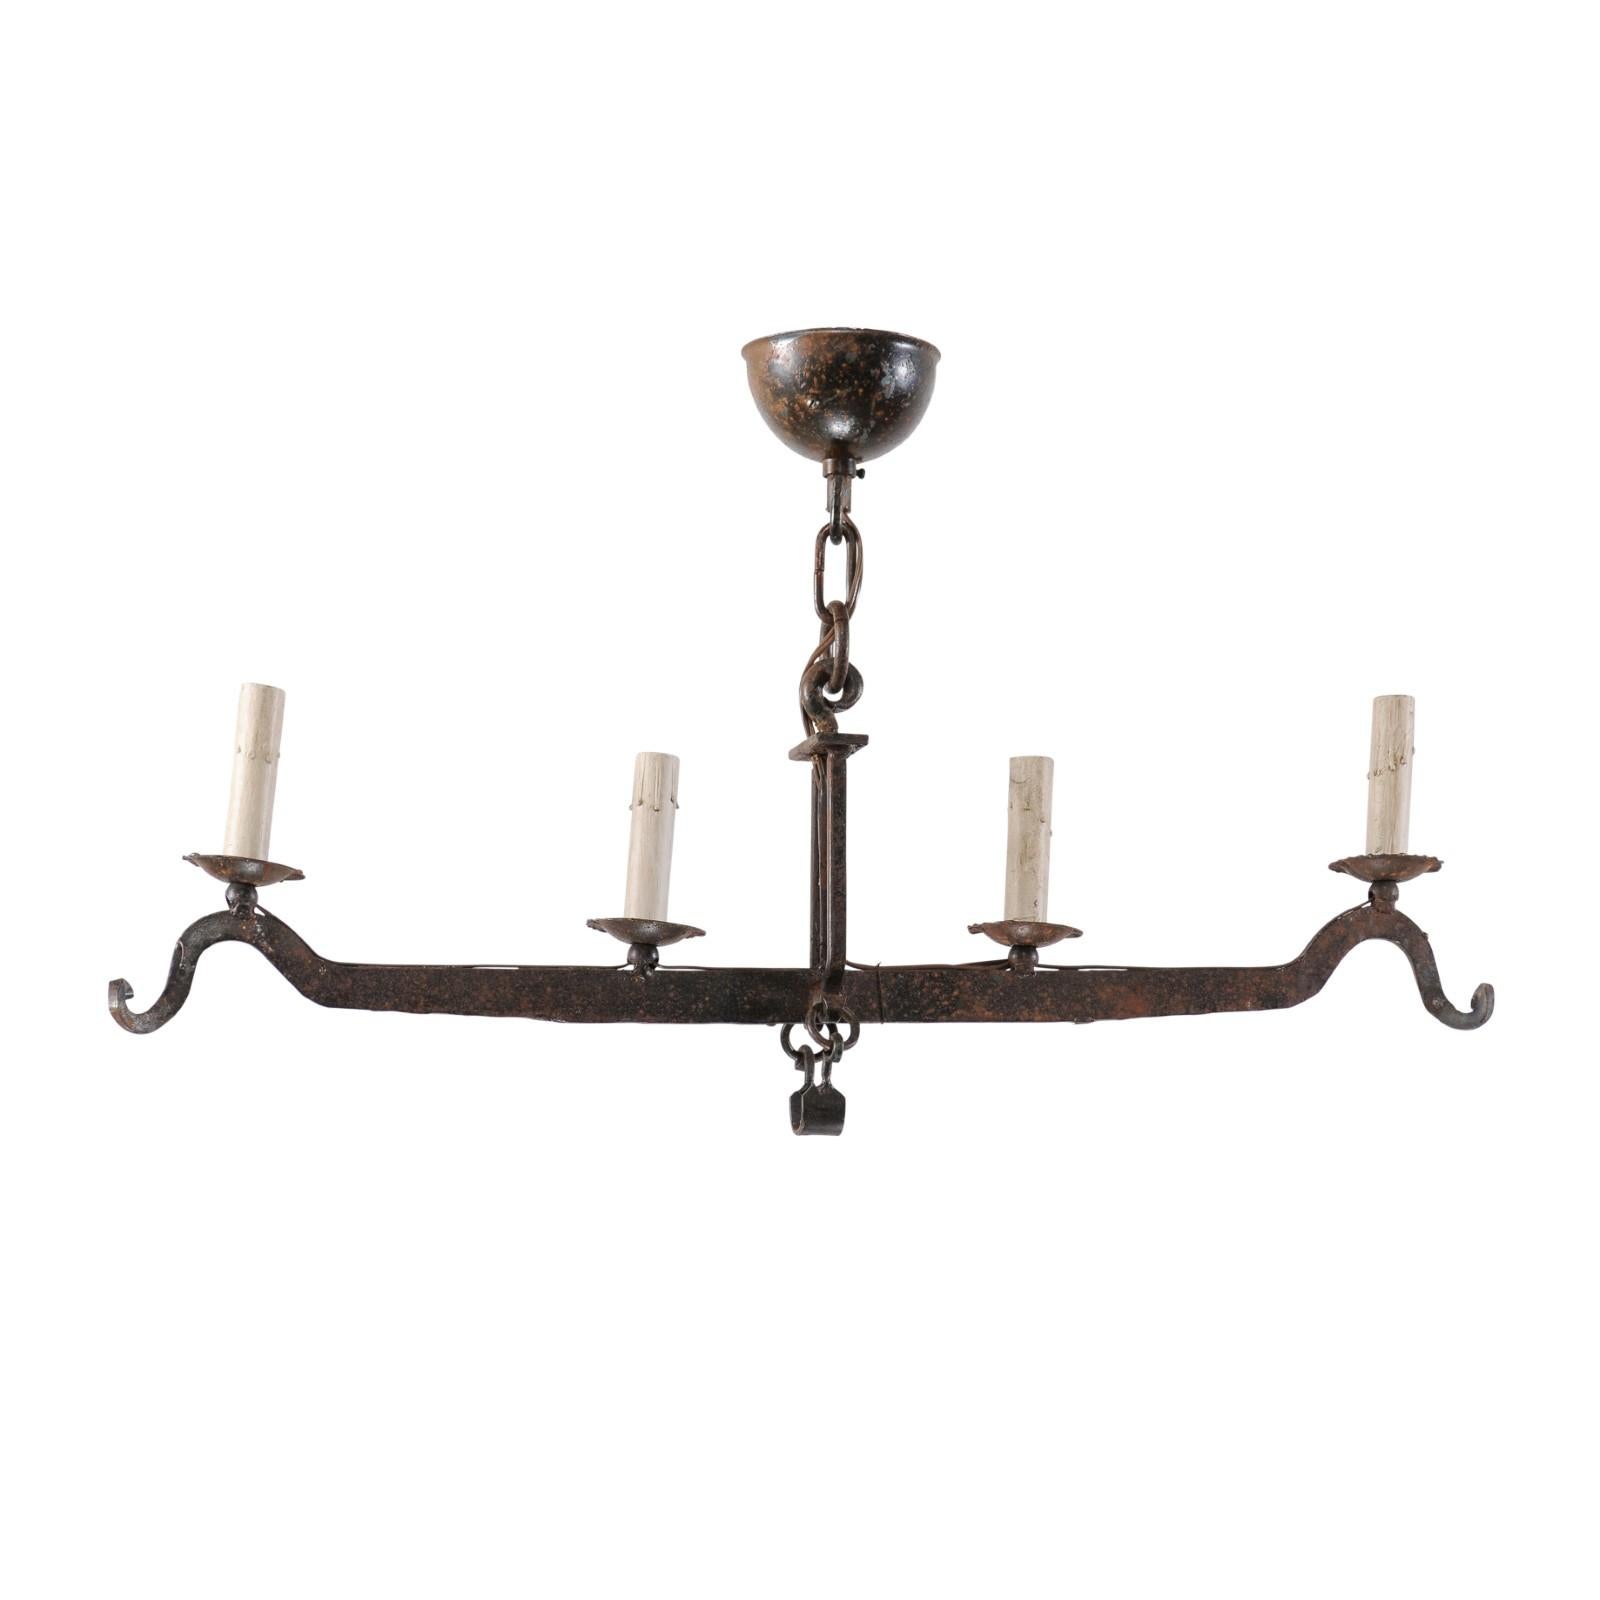 Midcentury French Iron Scale 4-Light Chandelier